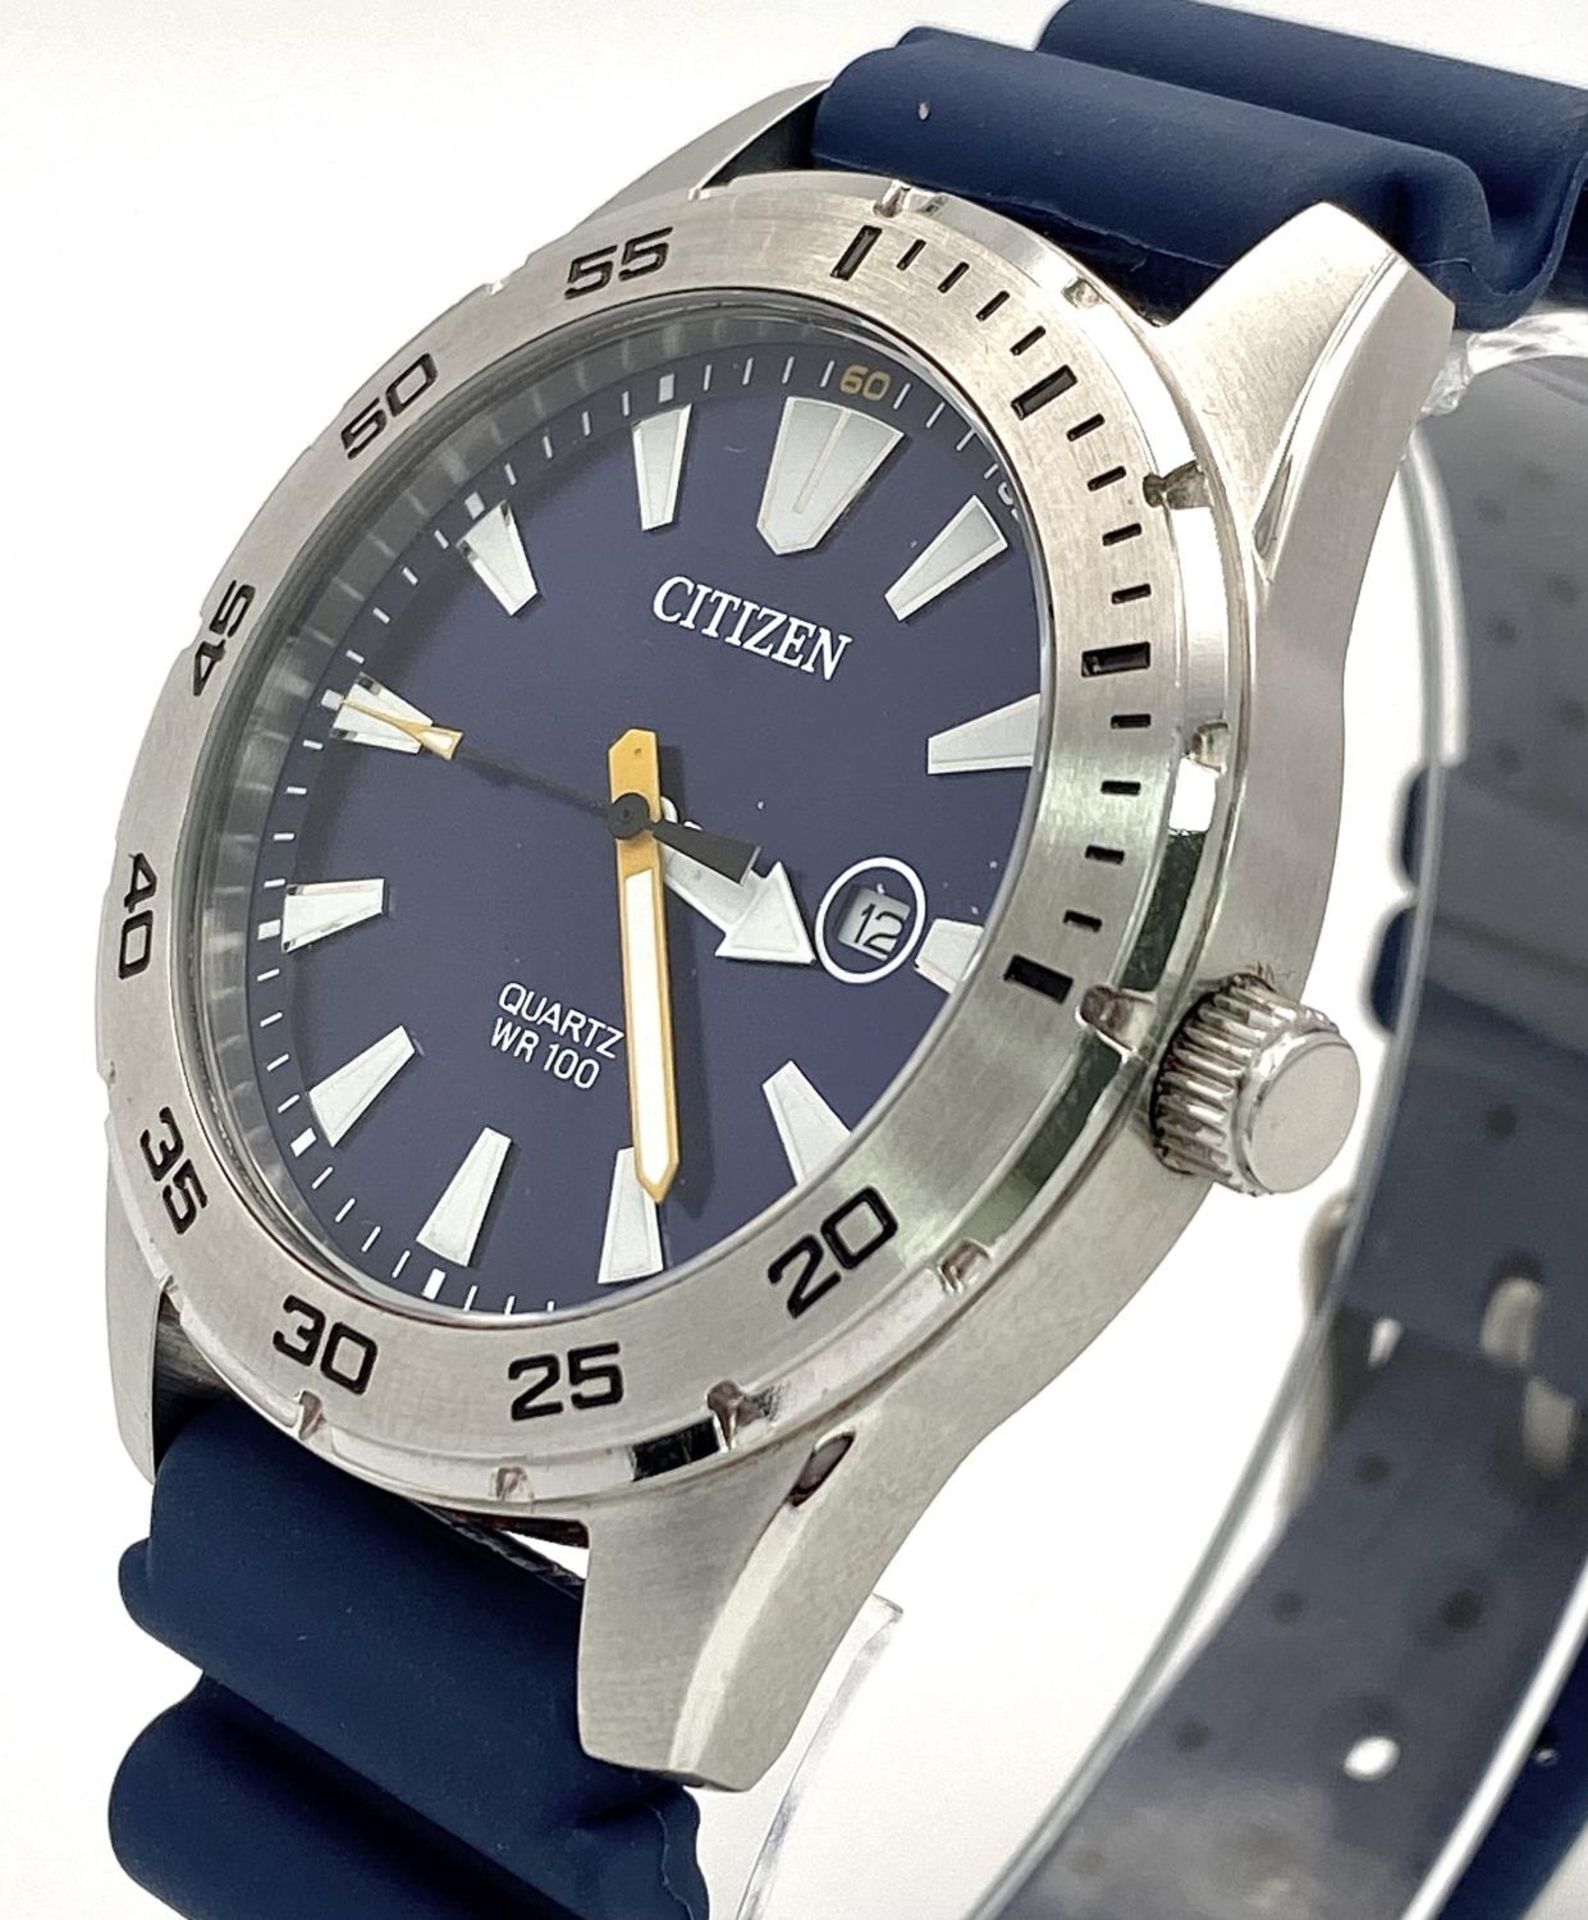 A Citizen Quartz Gents Watch. Blue rubber strap. Stainless steel case - 42mm. Blue dial with date - Image 2 of 6